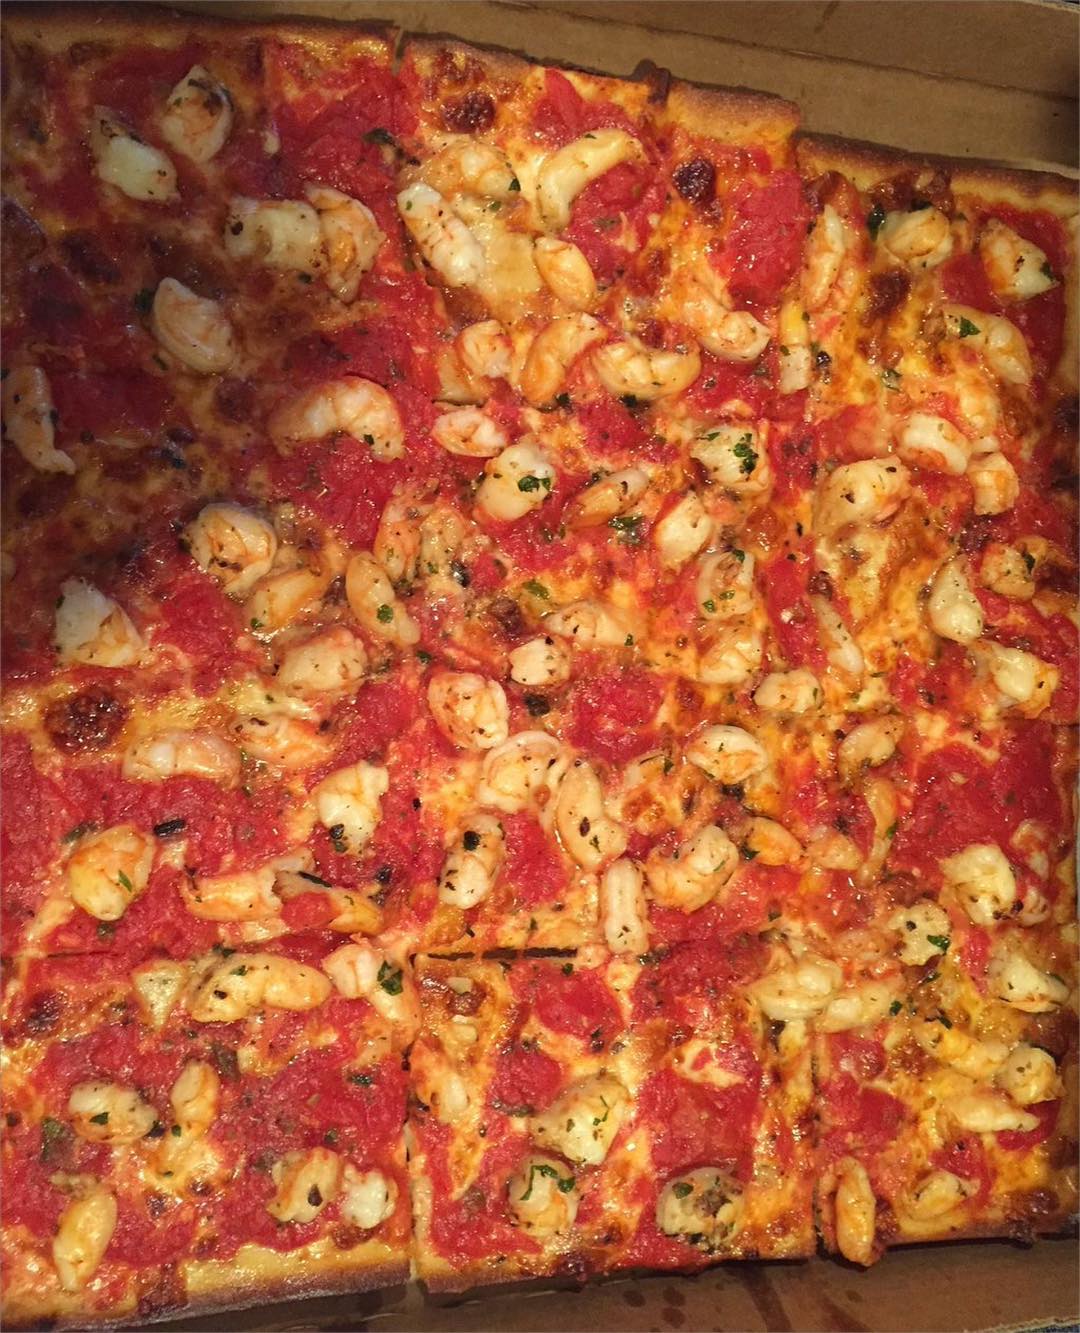 The Double Shrimp Grandma Pie from @UmbertosPizza is Absolutely Phenomenal!!